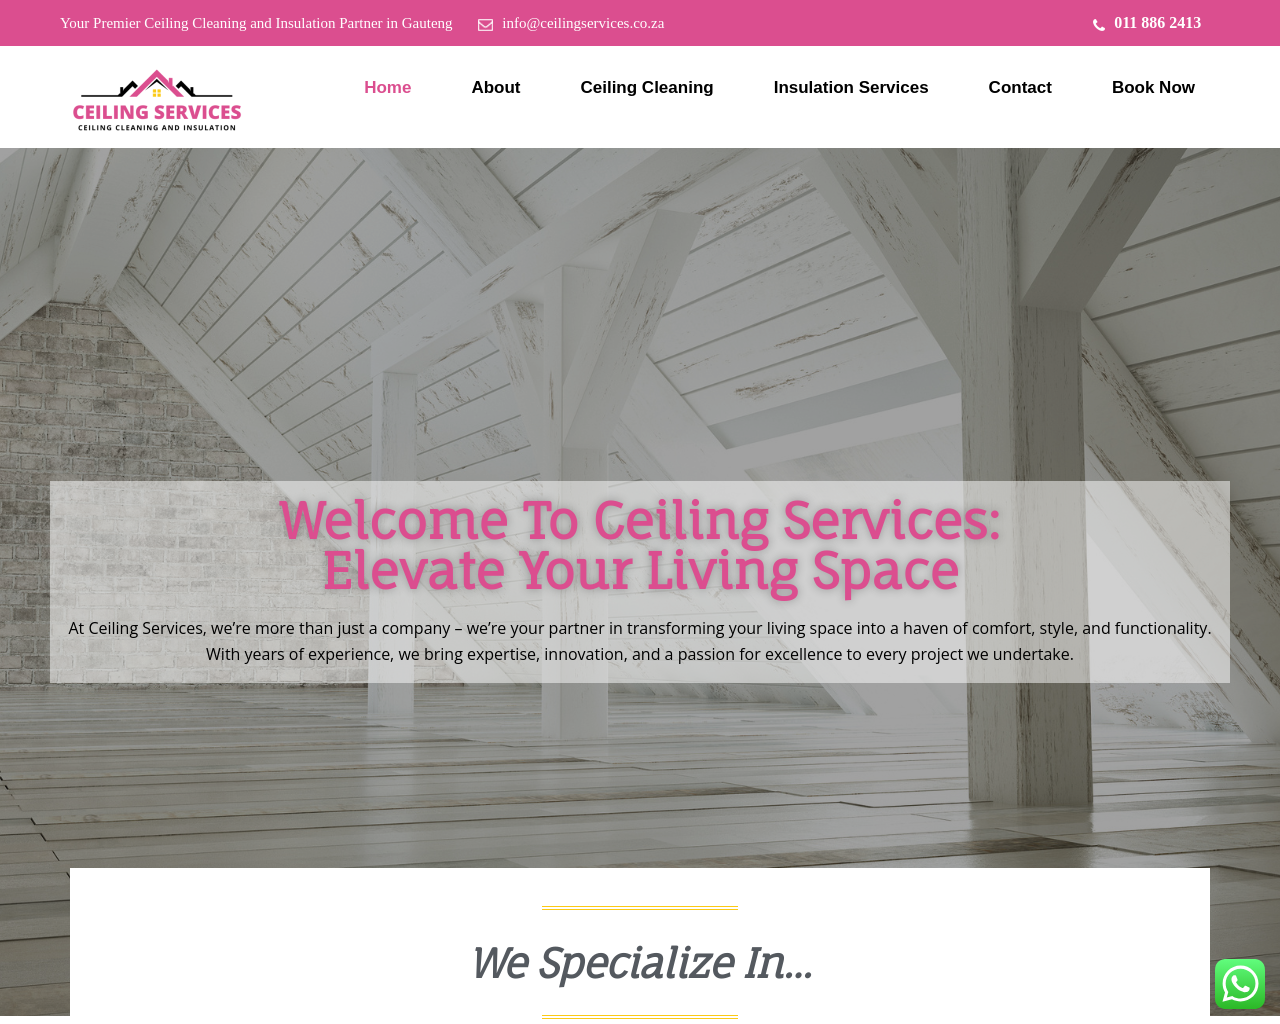 ceilingservices.co.za